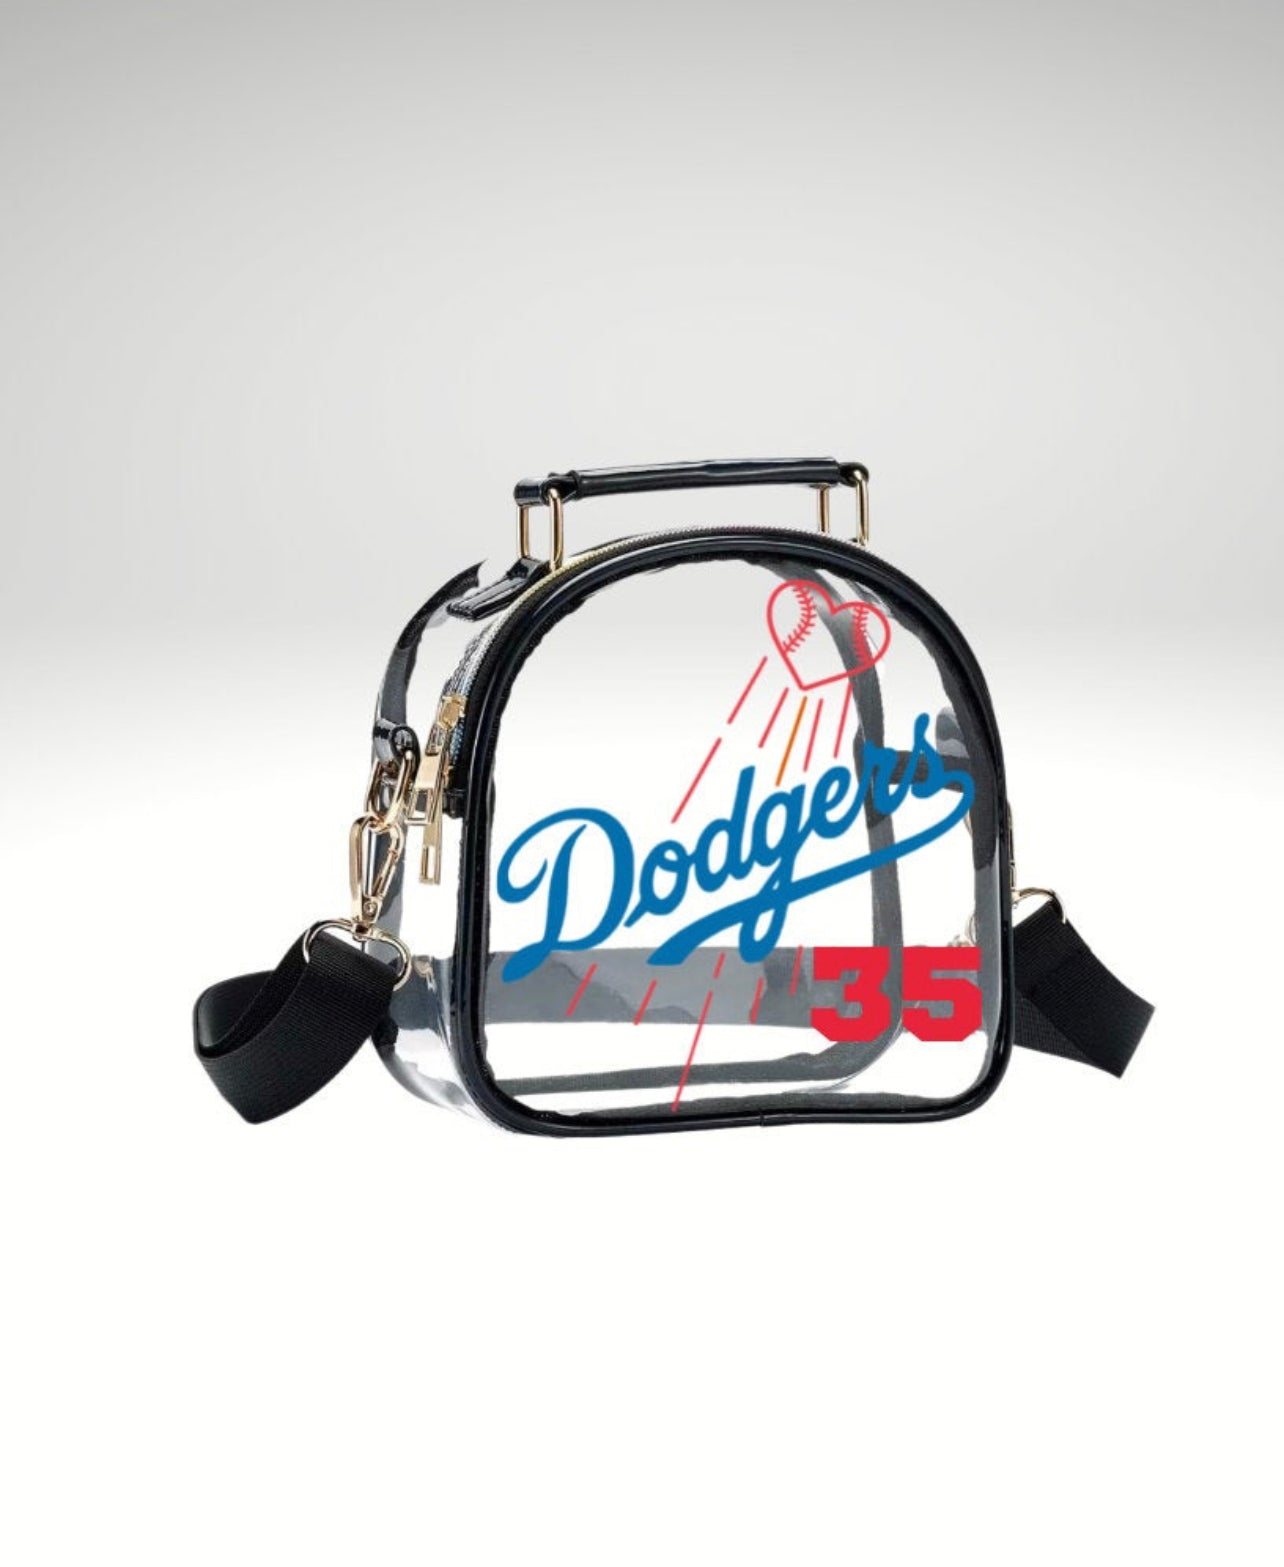 Clear Stadium Approved Purse/Xbody.